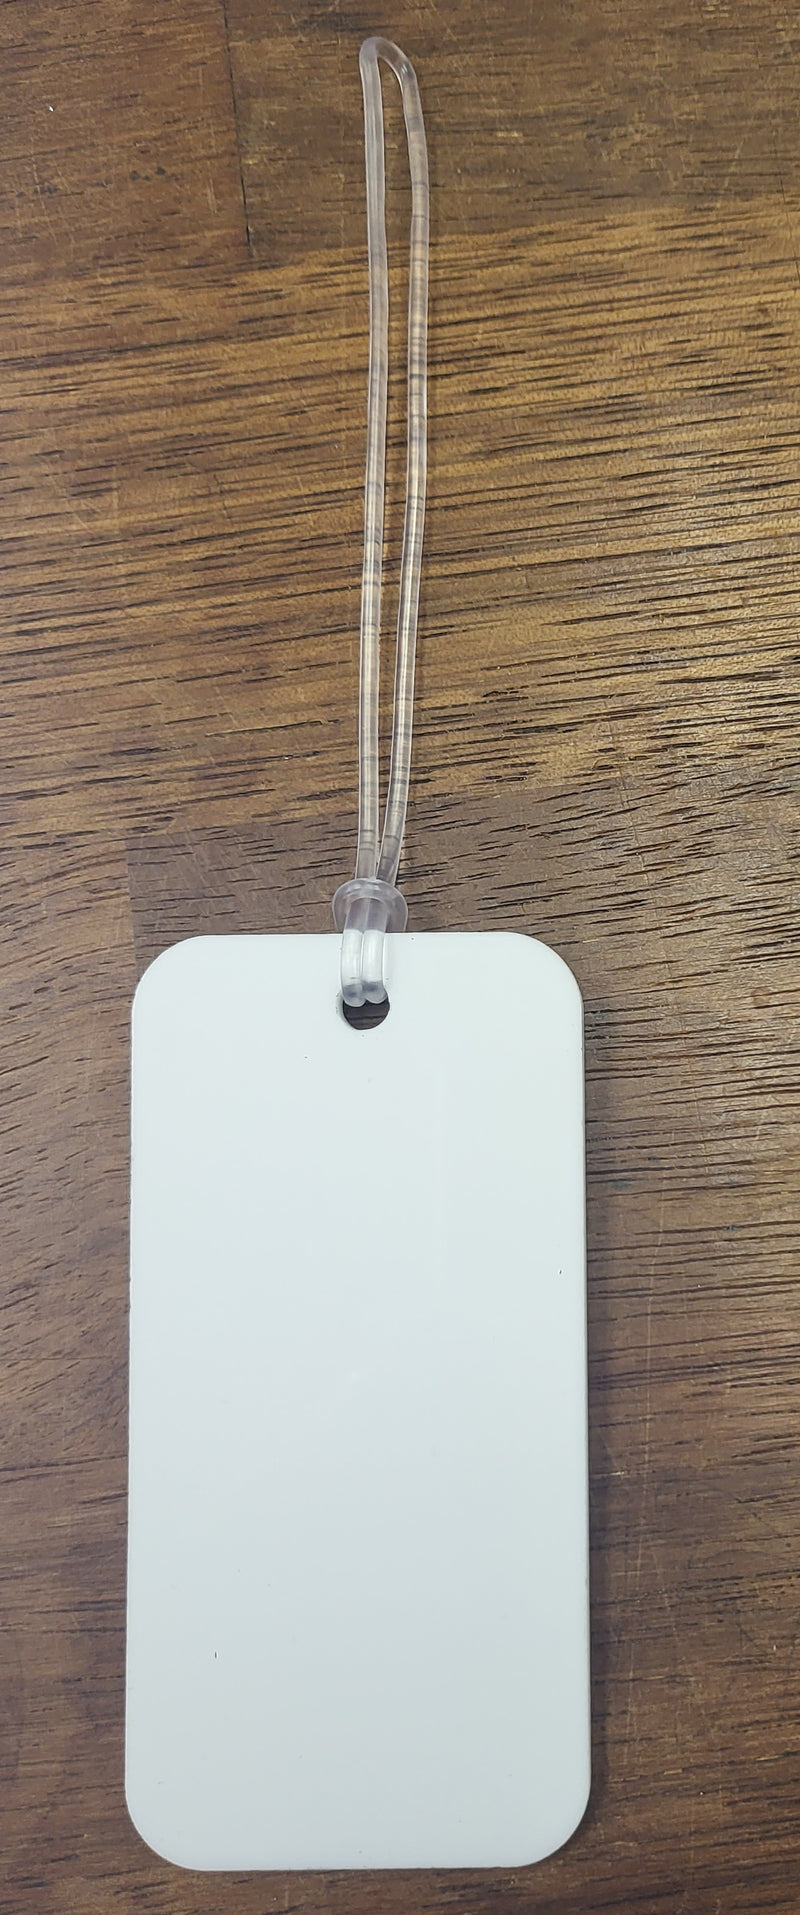 3mm White Acrylic Bag Tag with hole and bag tag loop 11cm x 5.5cm